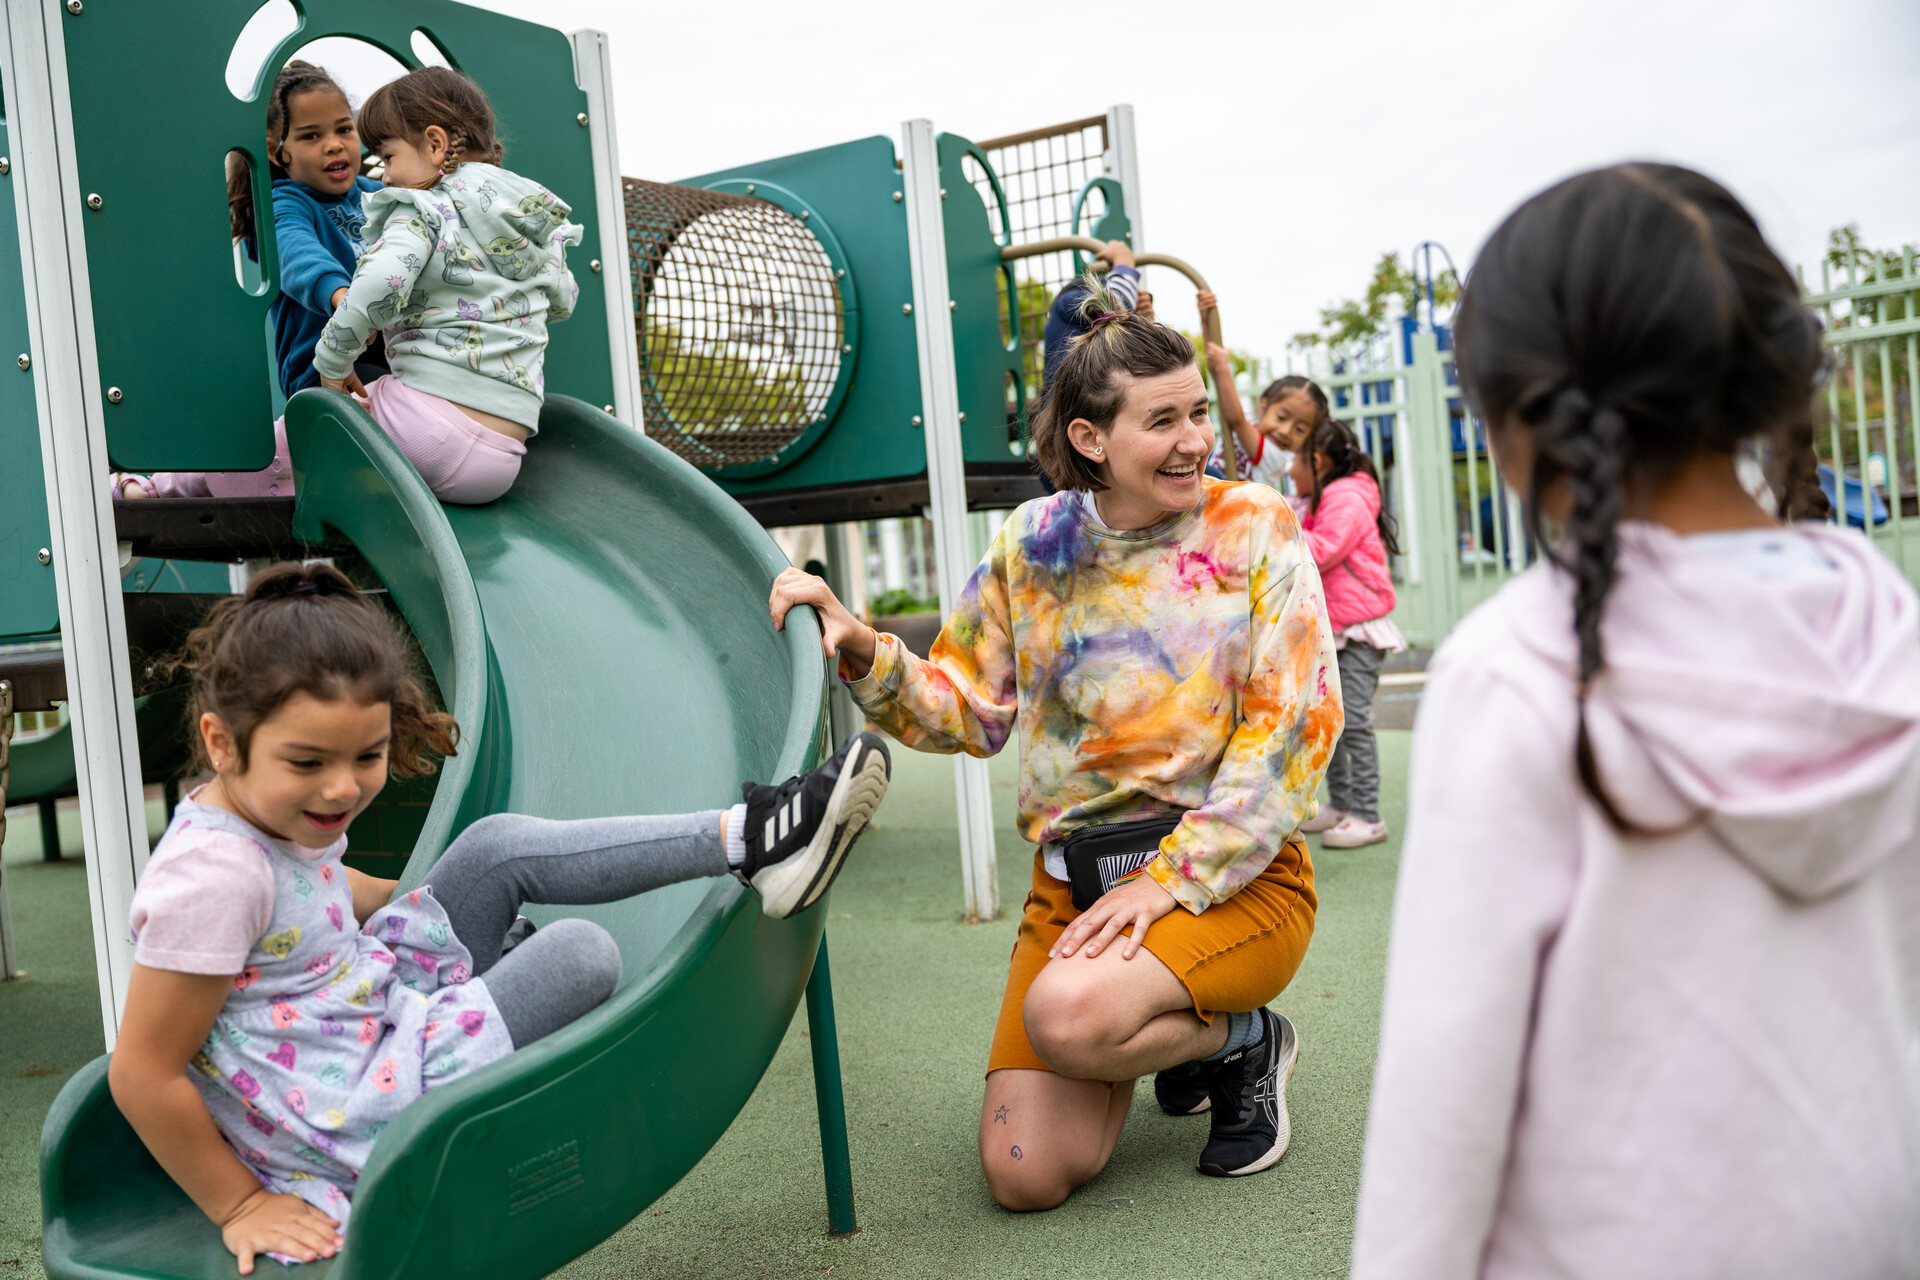 A teacher smiles as she plays with students at an outdoor play gym slide